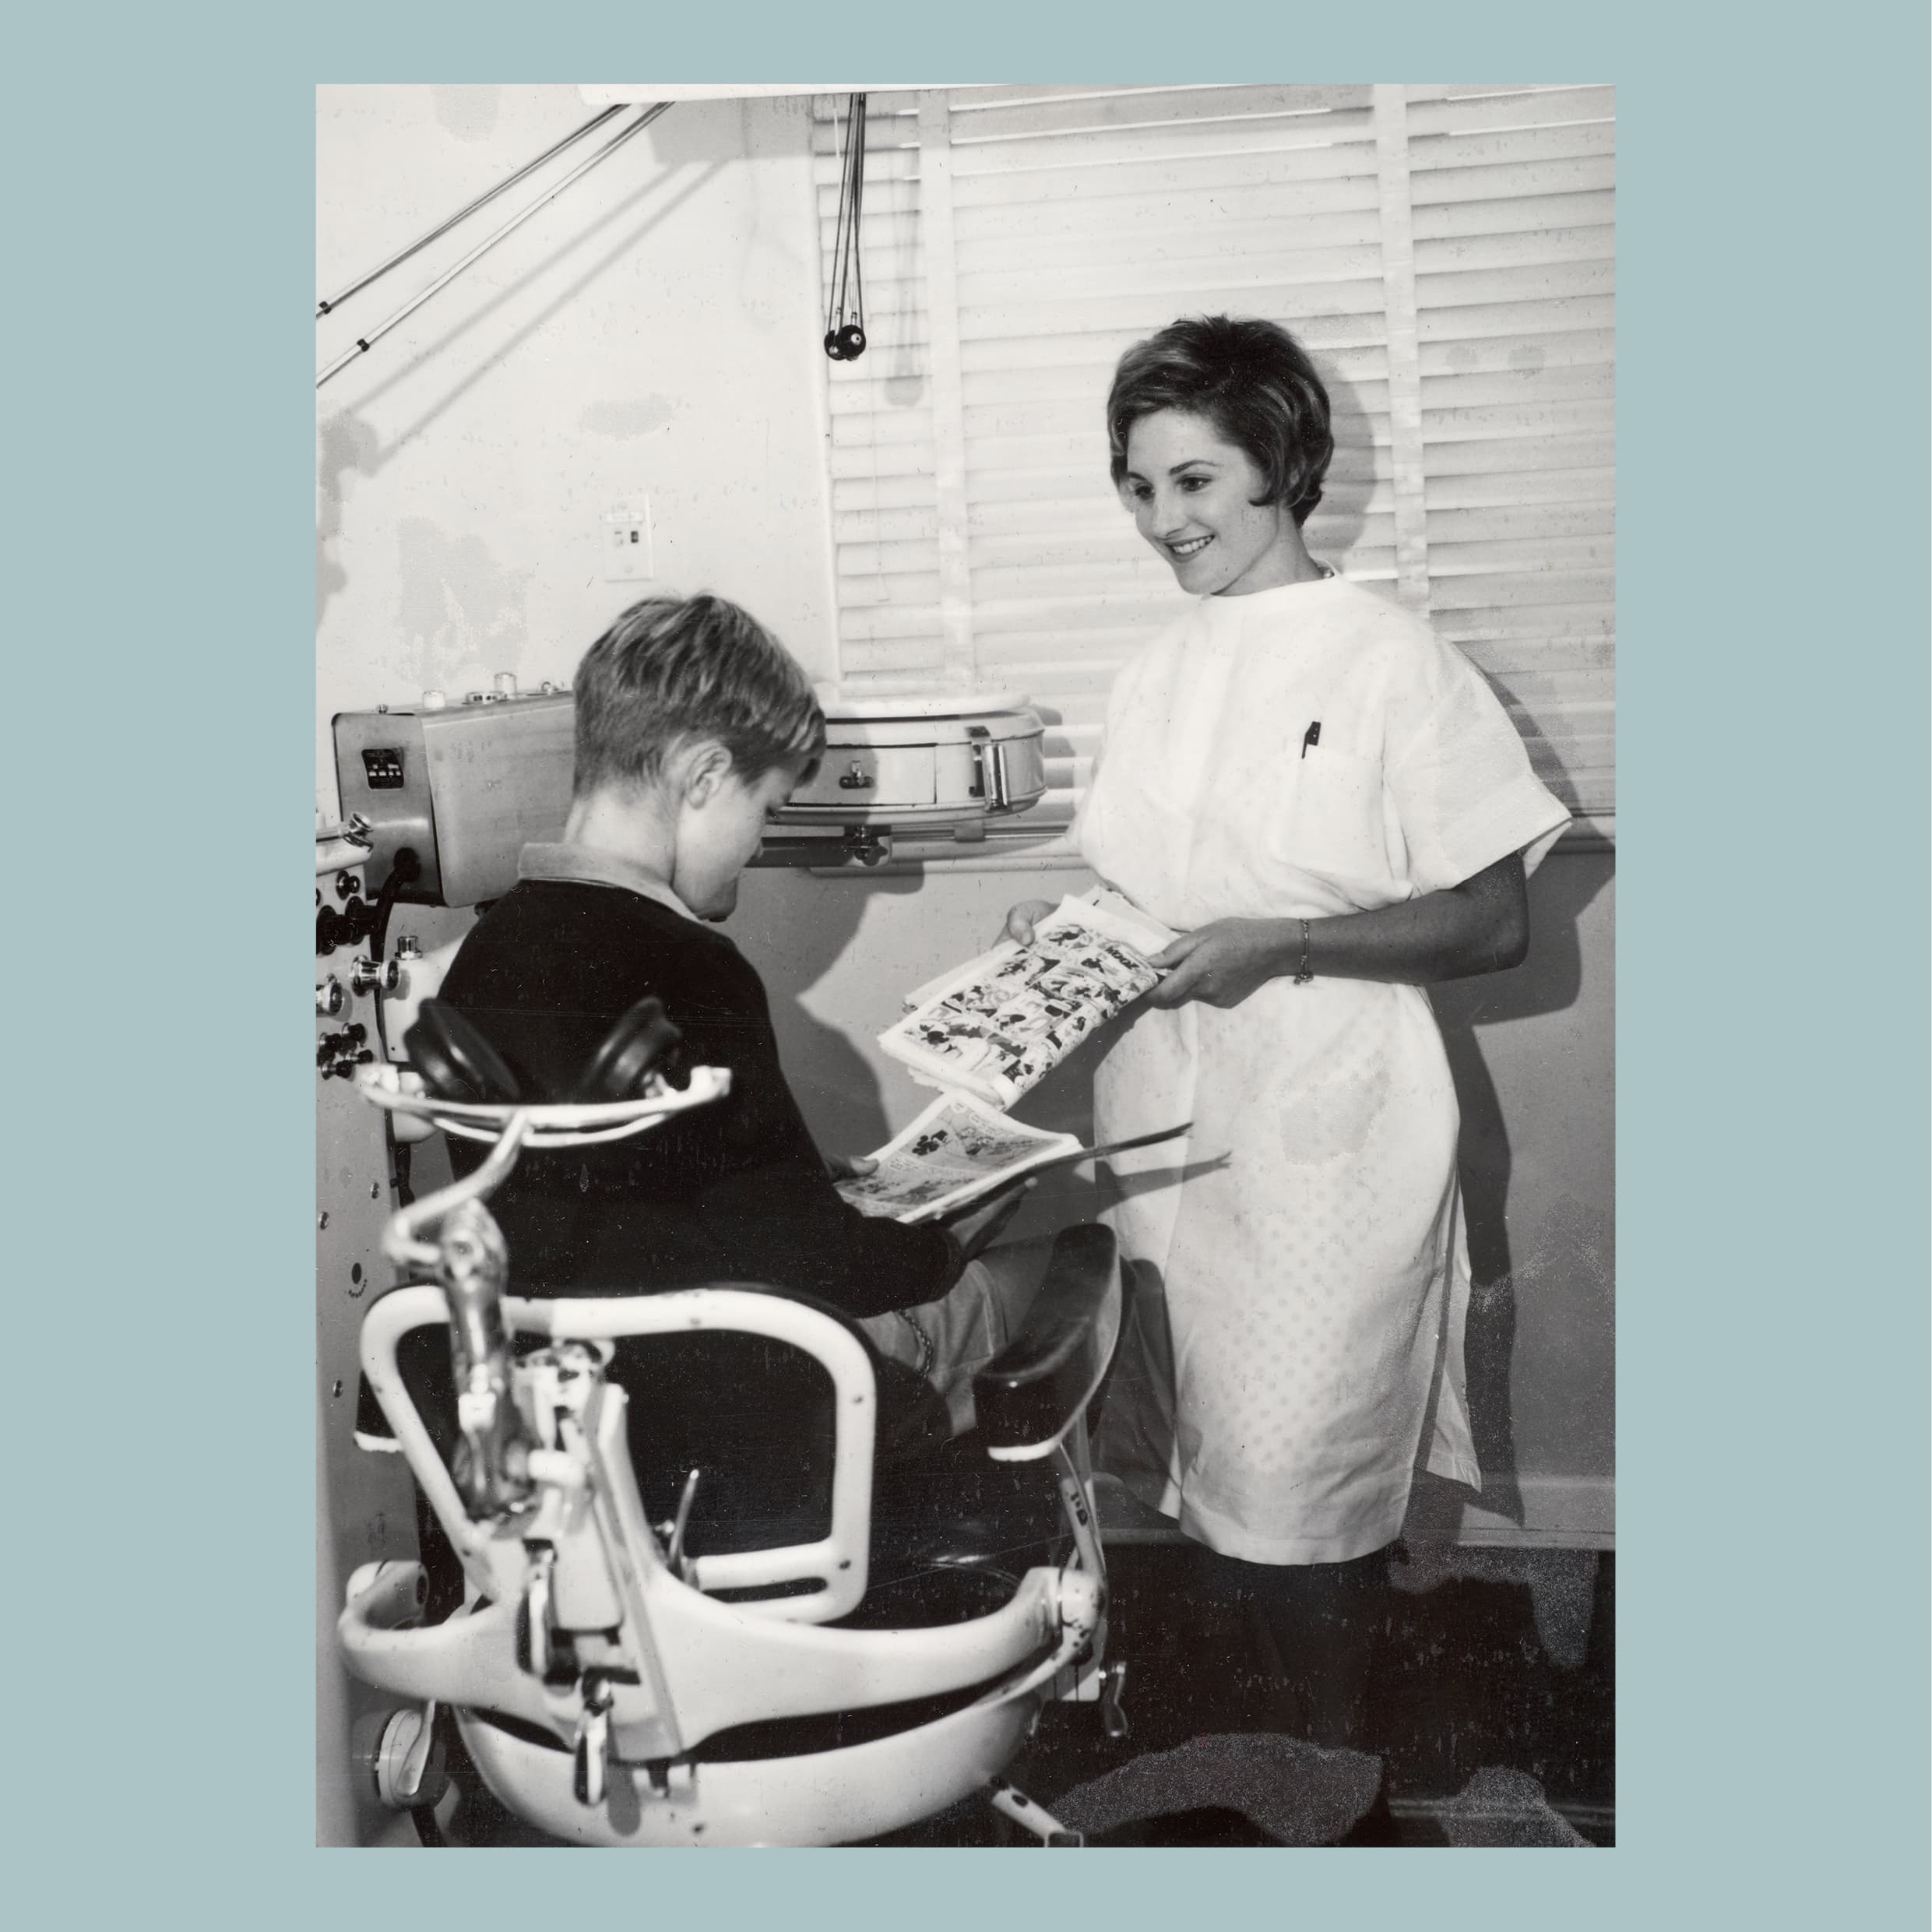 Victorian Department of Health, School Dental Service, School student in mobile van with dental therapist, c. 1970s, photograph, card, image 16.8 × 12.7 cm. HFADM 3794, Henry Forman Atkinson Dental Museum, University of Melbourne.  